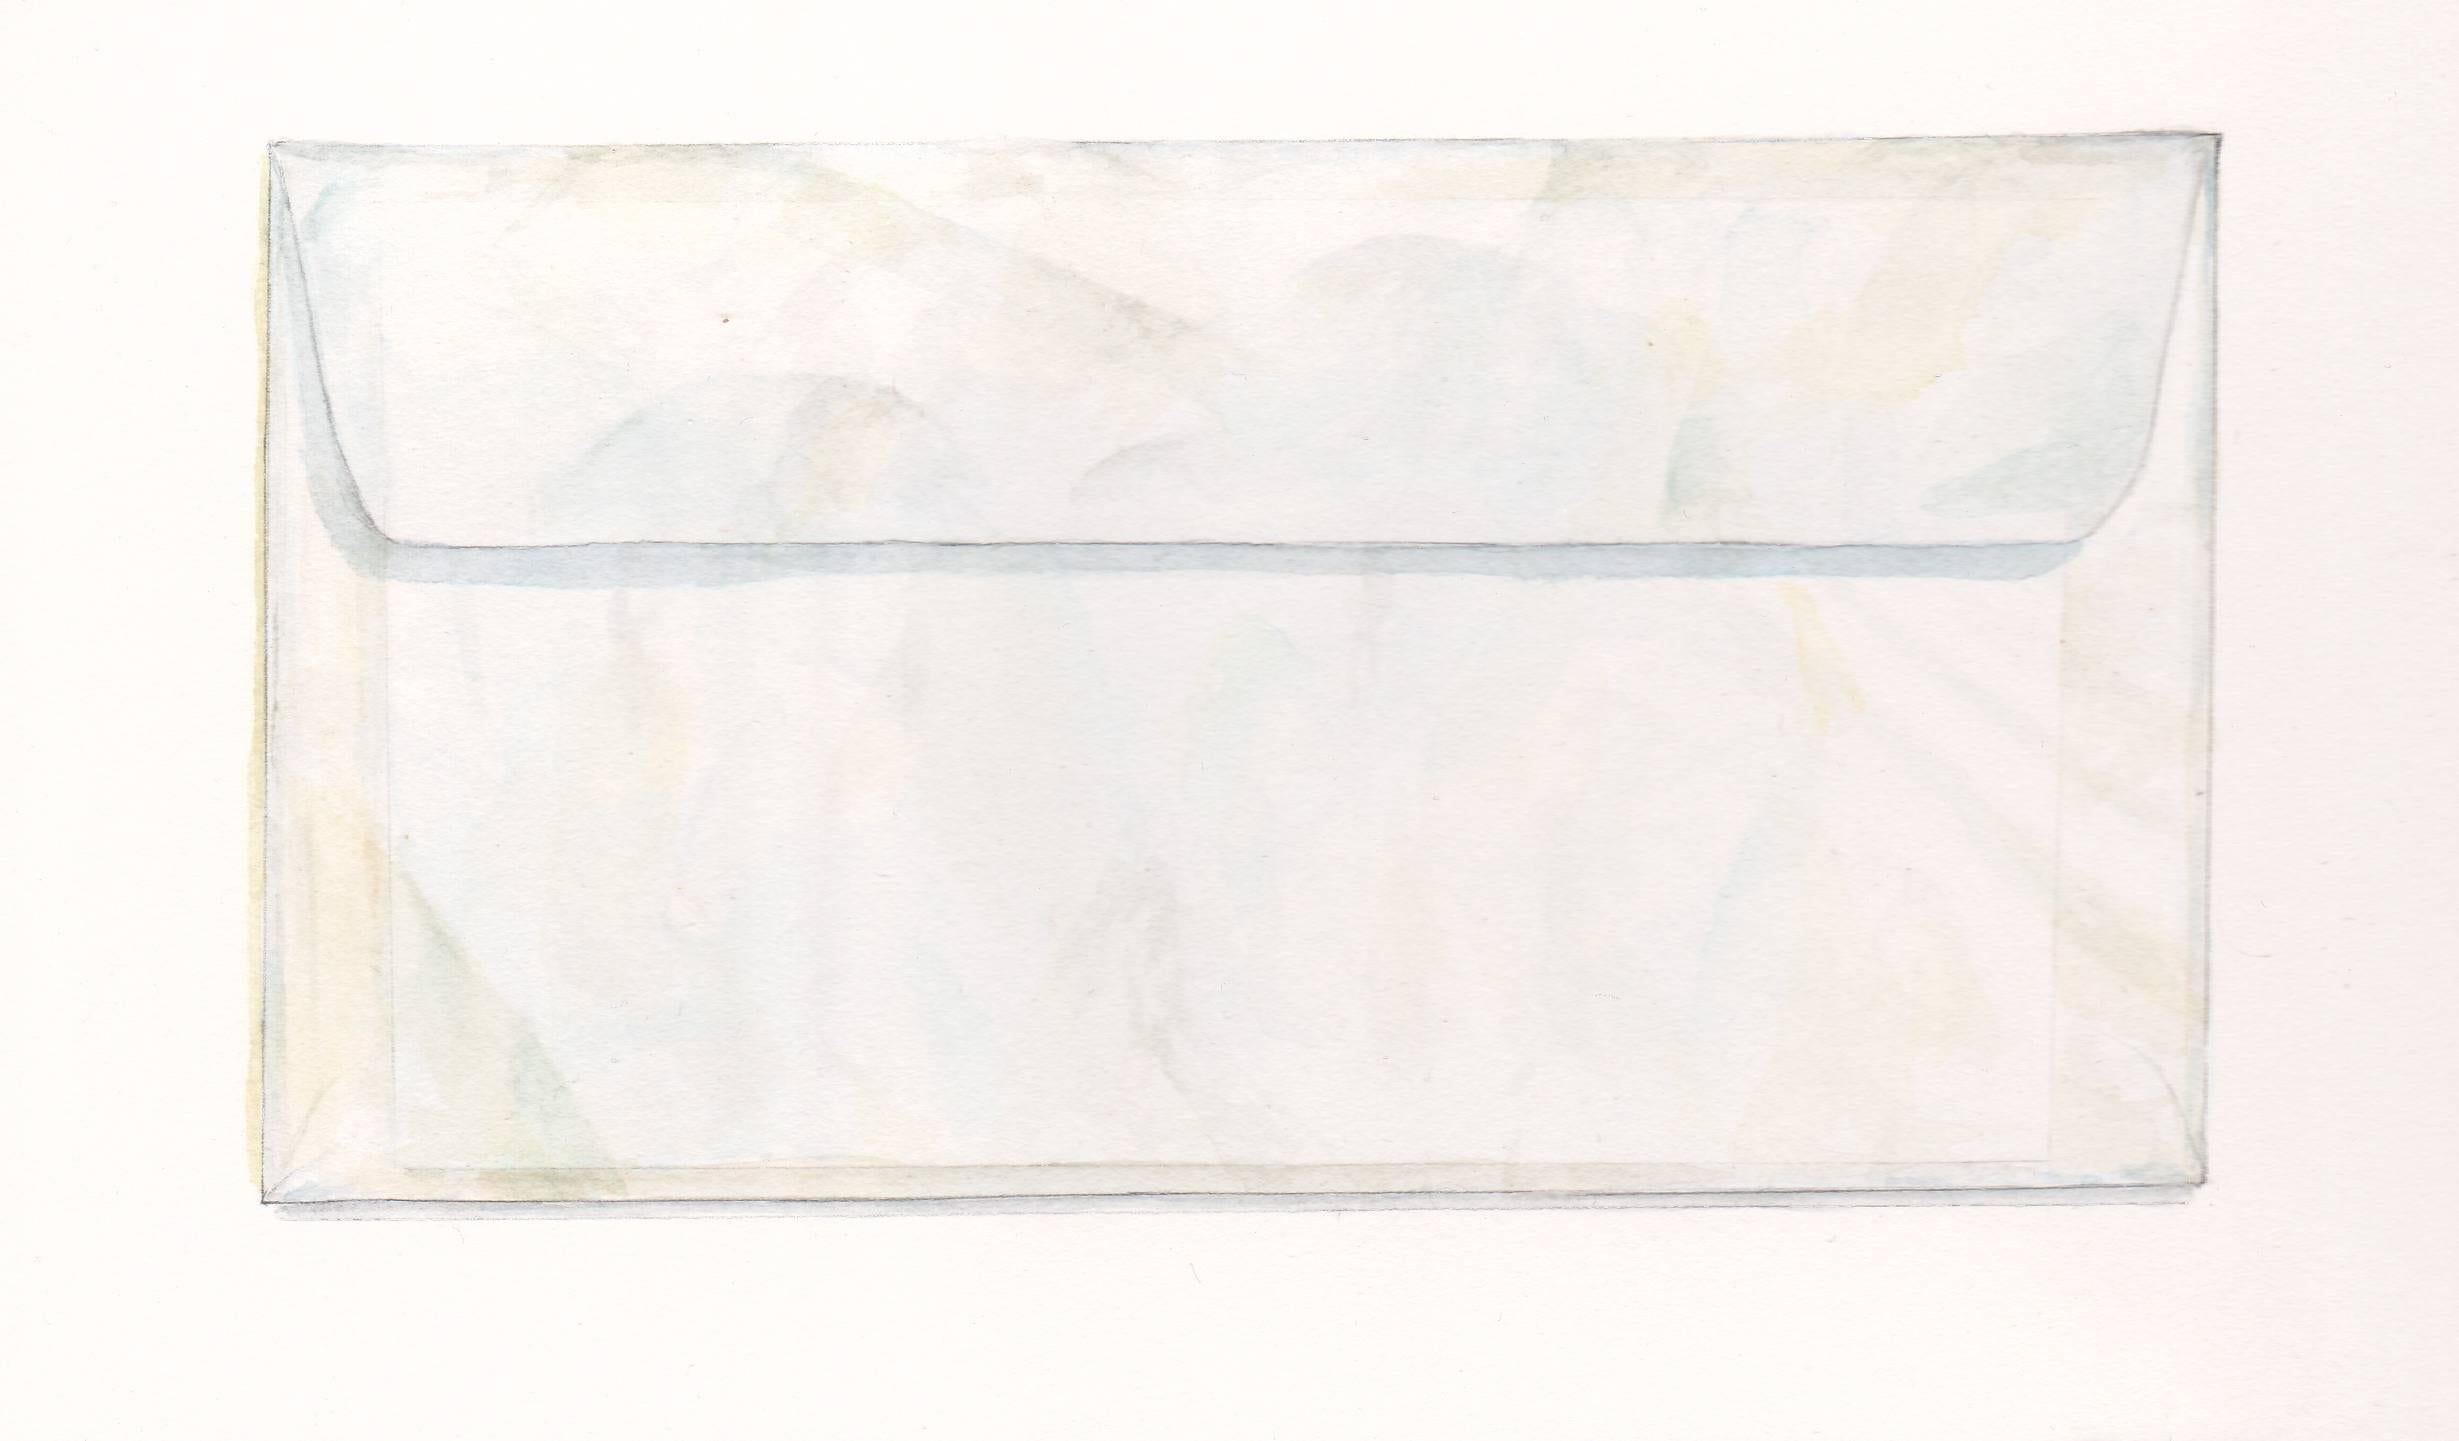 Margot Glass, Long Glassine Envelope, Watercolor and pencil still life, 2016